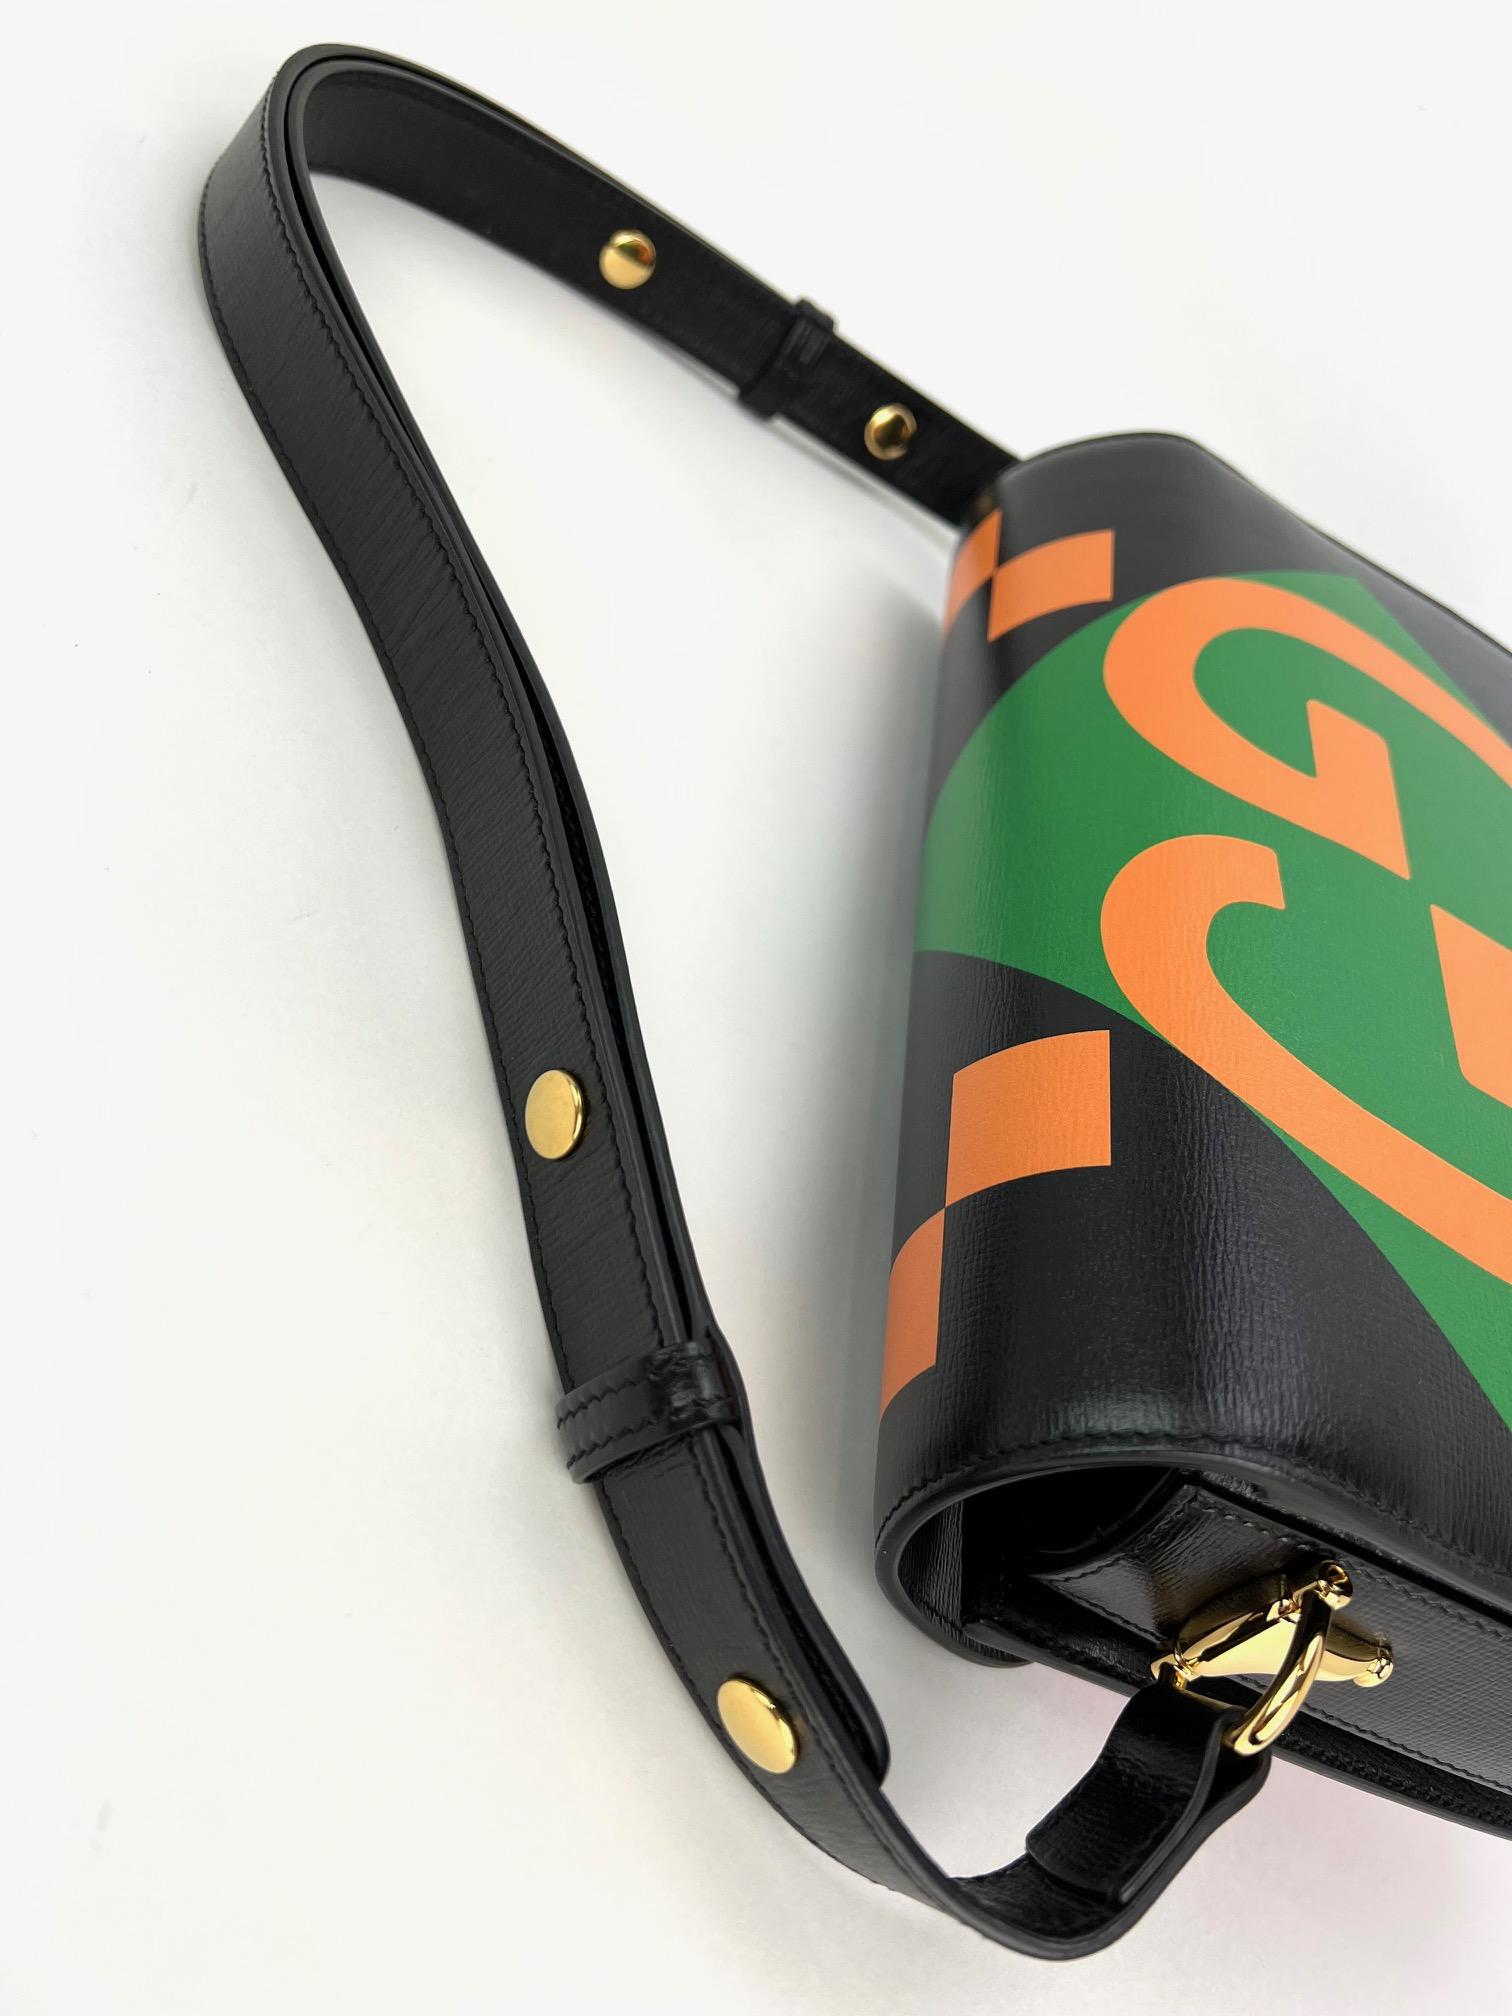 Preowned100% Authentic
Gucci Textured Calfskin Horsebit 1955 
Black Multicolor Shoulder Bag
RATING: A...excellent, near mint, has little 
to no signs of wear
MATERIAL: calfskin
STRAP: adjustable black leather, has some wrinkles 
DROP: 10 in to 18 in